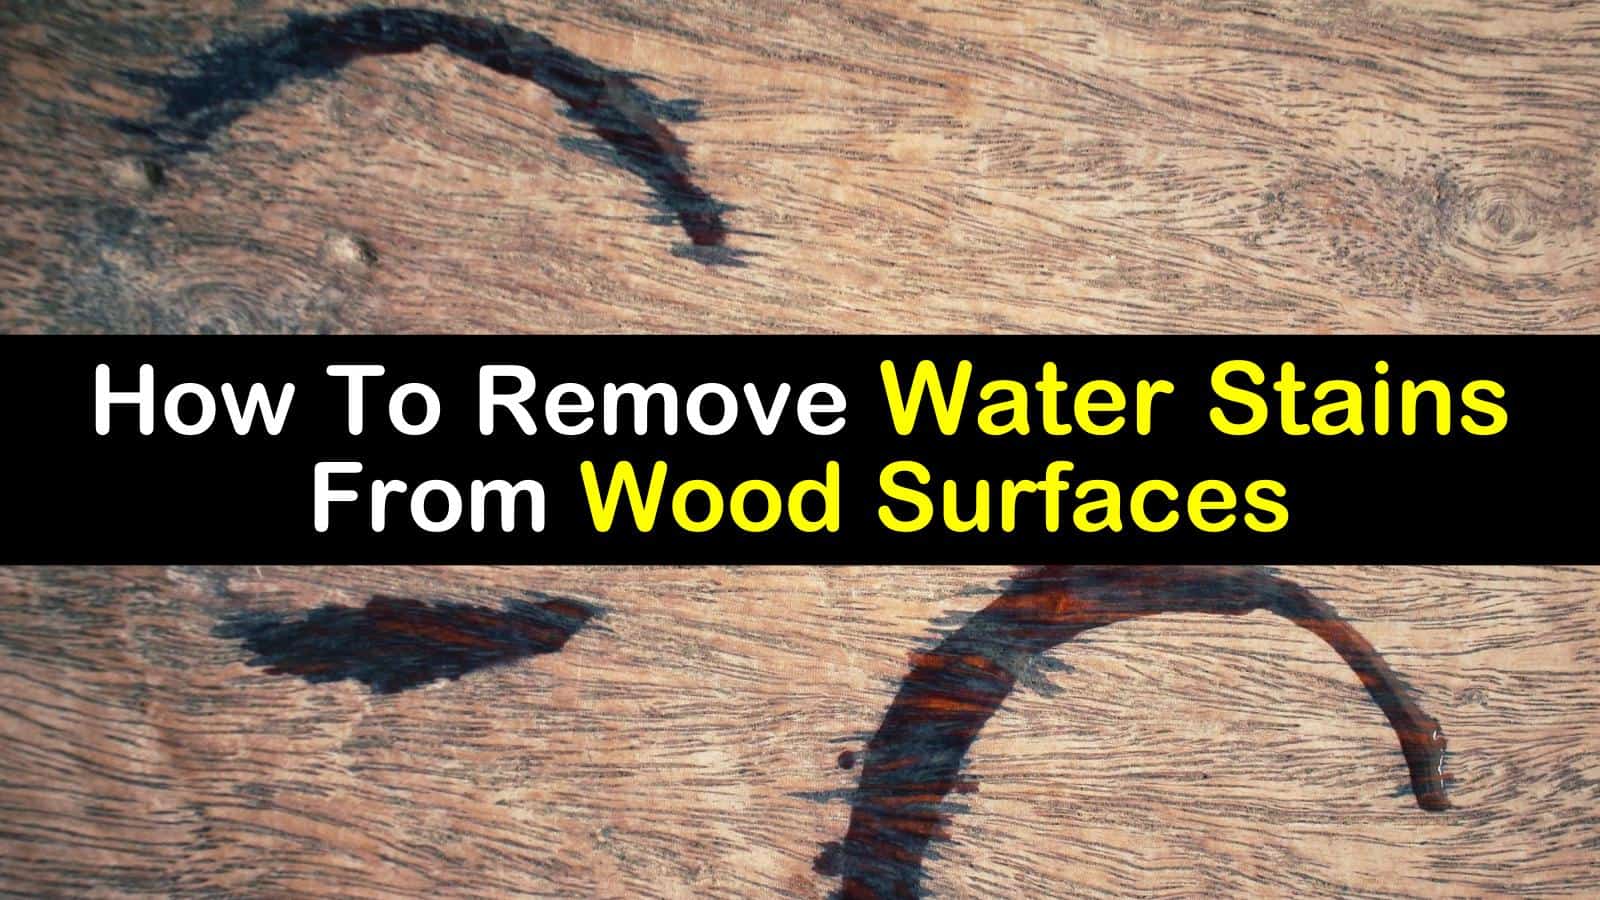 Remove Water Stains From Wood, Remove Black Water Stains From Hardwood Floors